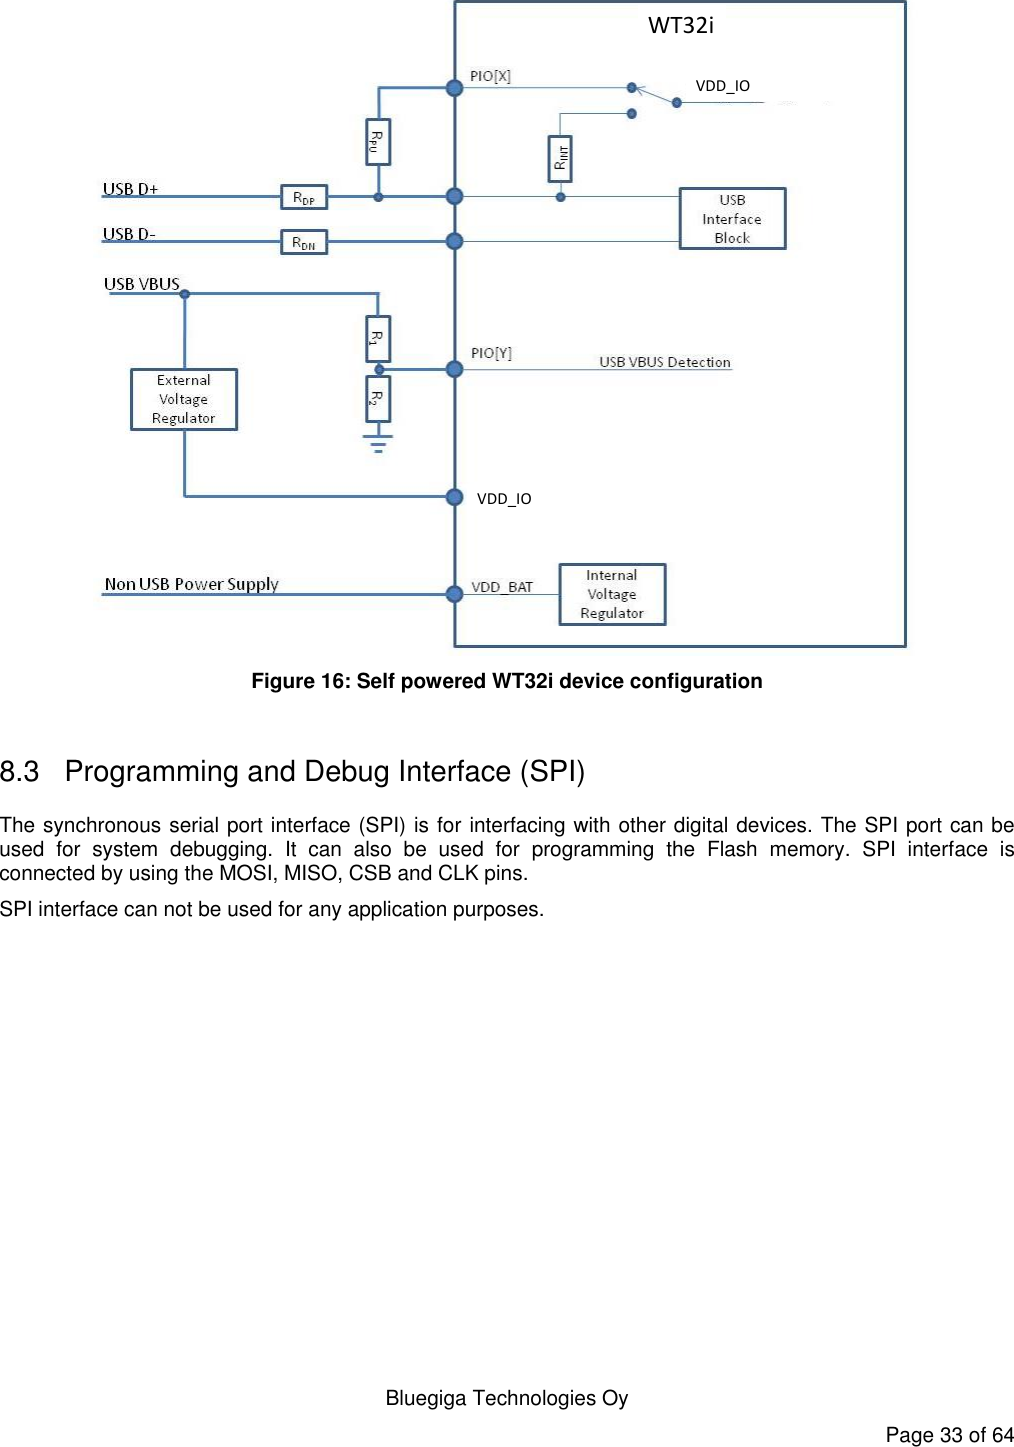   Bluegiga Technologies Oy Page 33 of 64 VDD_IOVDD_IOWT32i Figure 16: Self powered WT32i device configuration  8.3  Programming and Debug Interface (SPI) The synchronous serial port interface (SPI) is for interfacing with other digital devices. The SPI port can be used  for  system  debugging.  It  can  also  be  used  for  programming  the  Flash  memory.  SPI  interface  is connected by using the MOSI, MISO, CSB and CLK pins. SPI interface can not be used for any application purposes. 